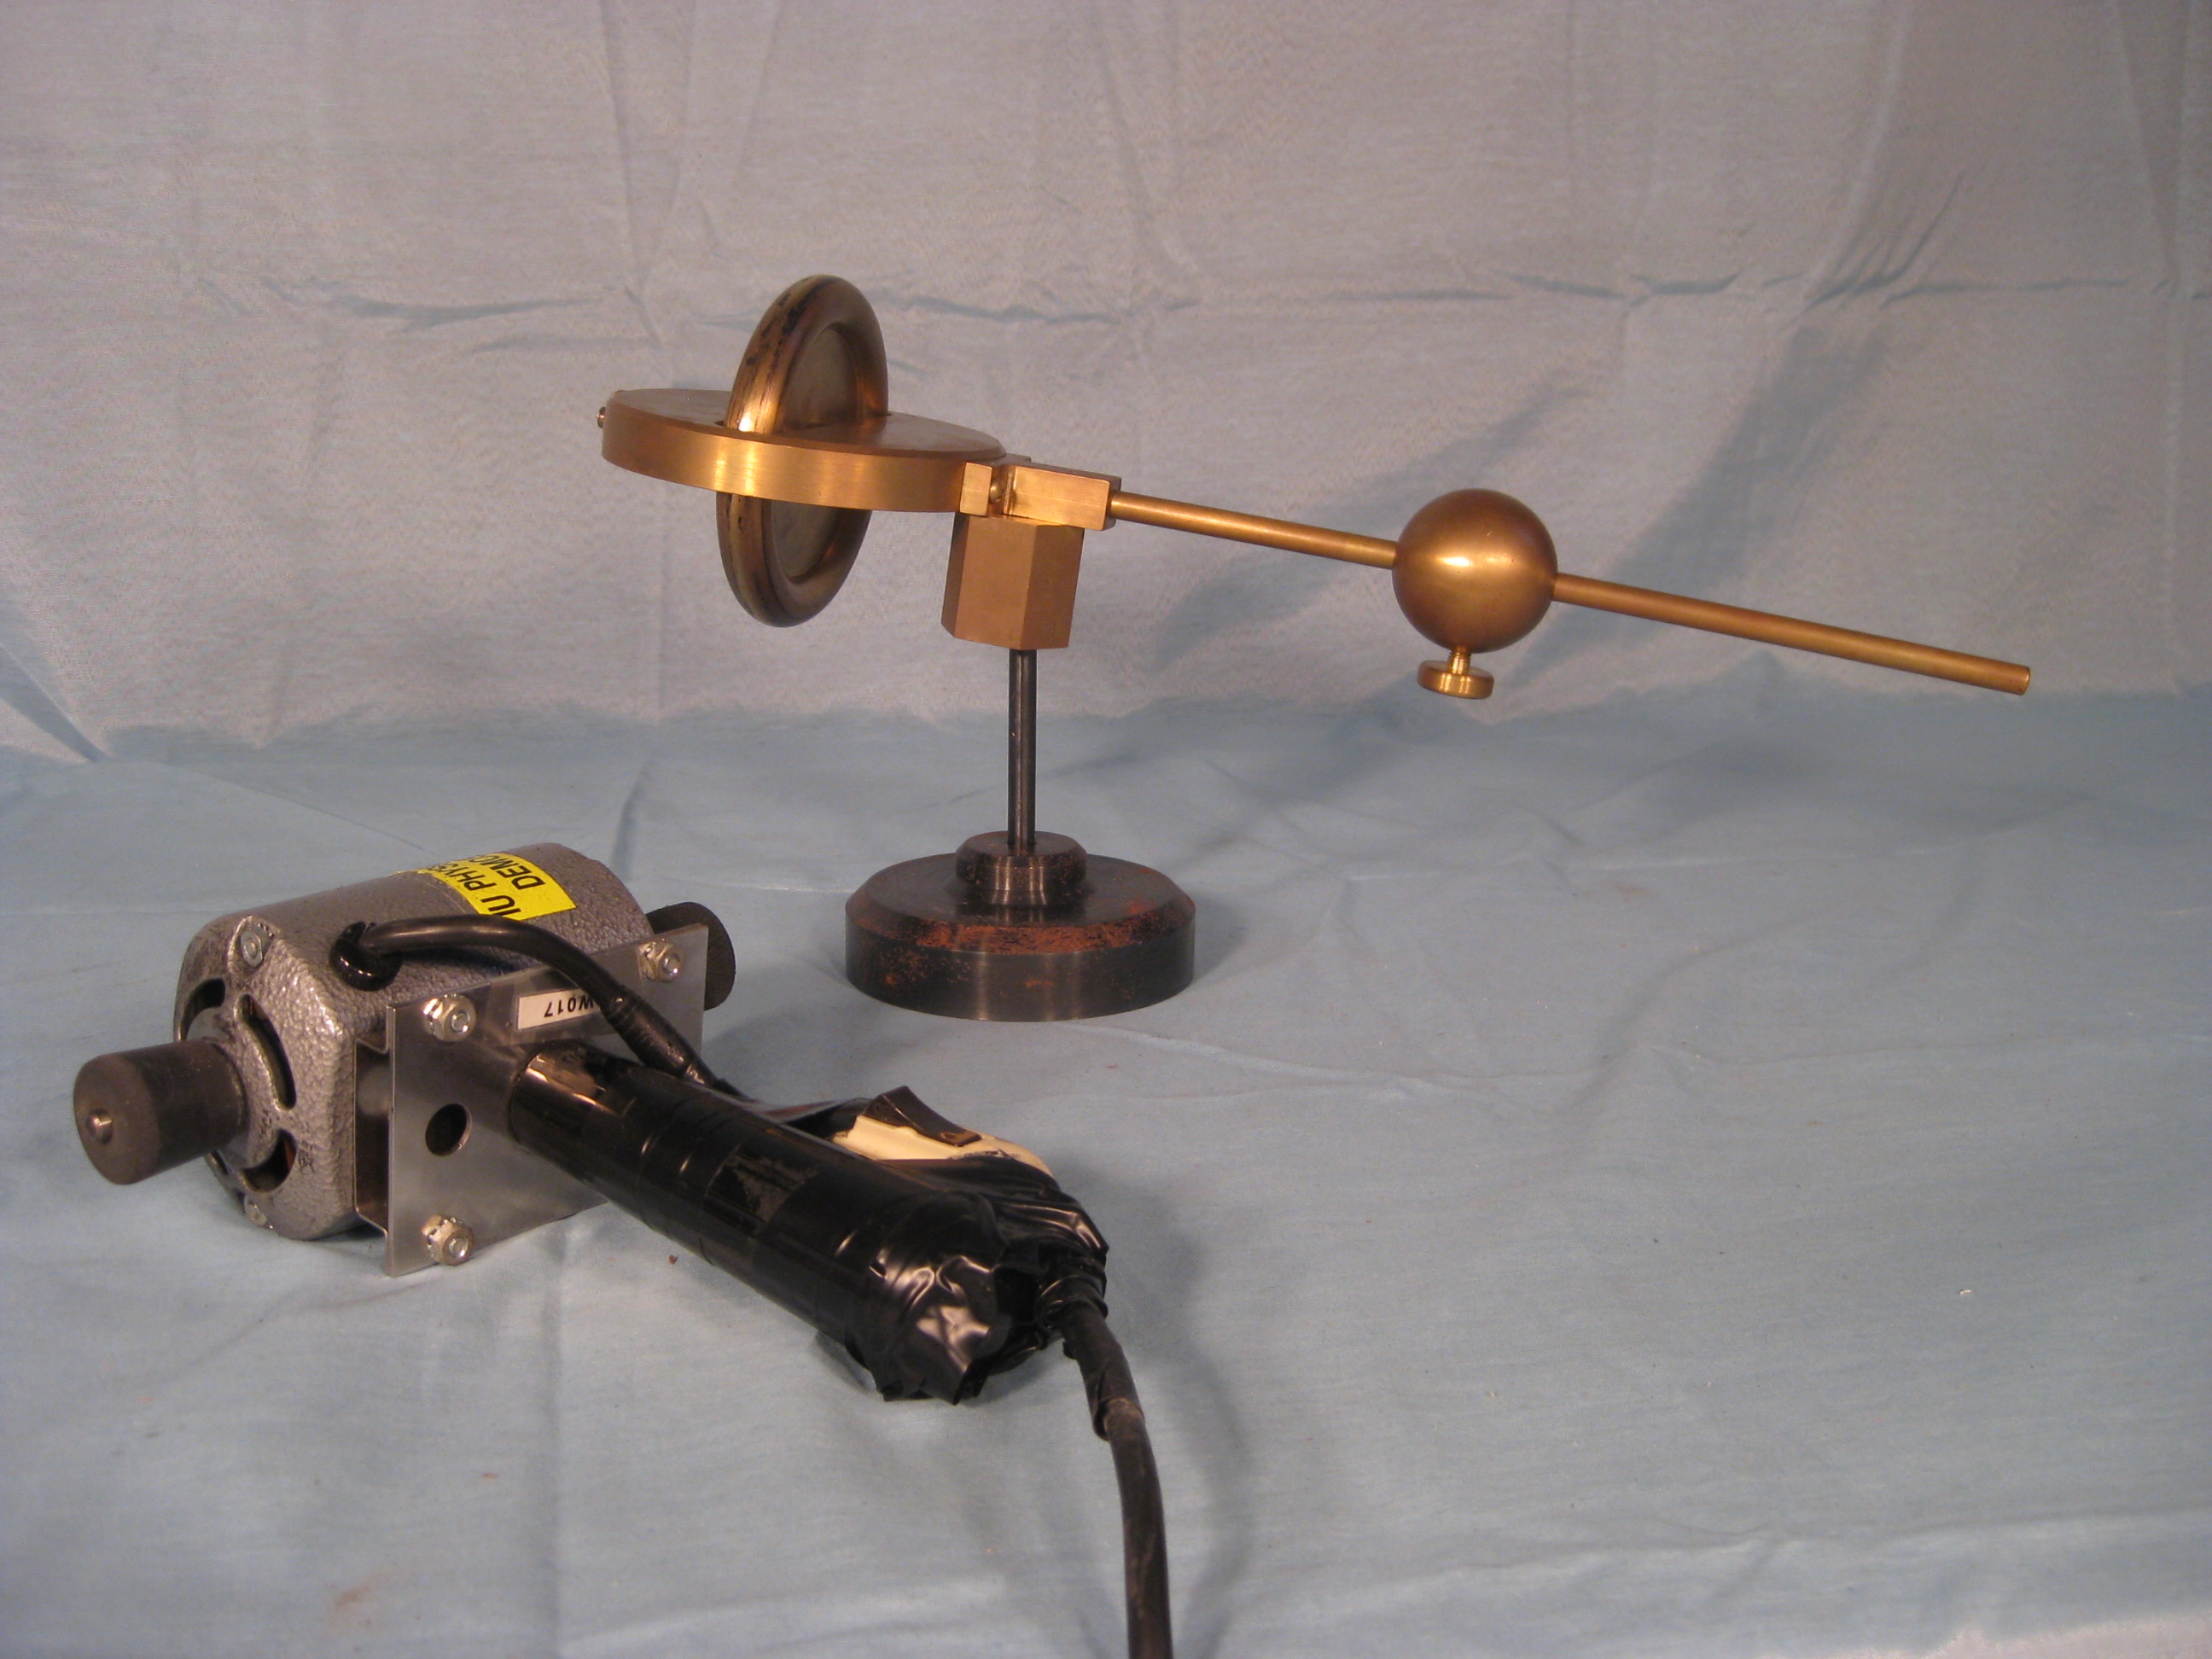 Gyroscope with counter weight. 3